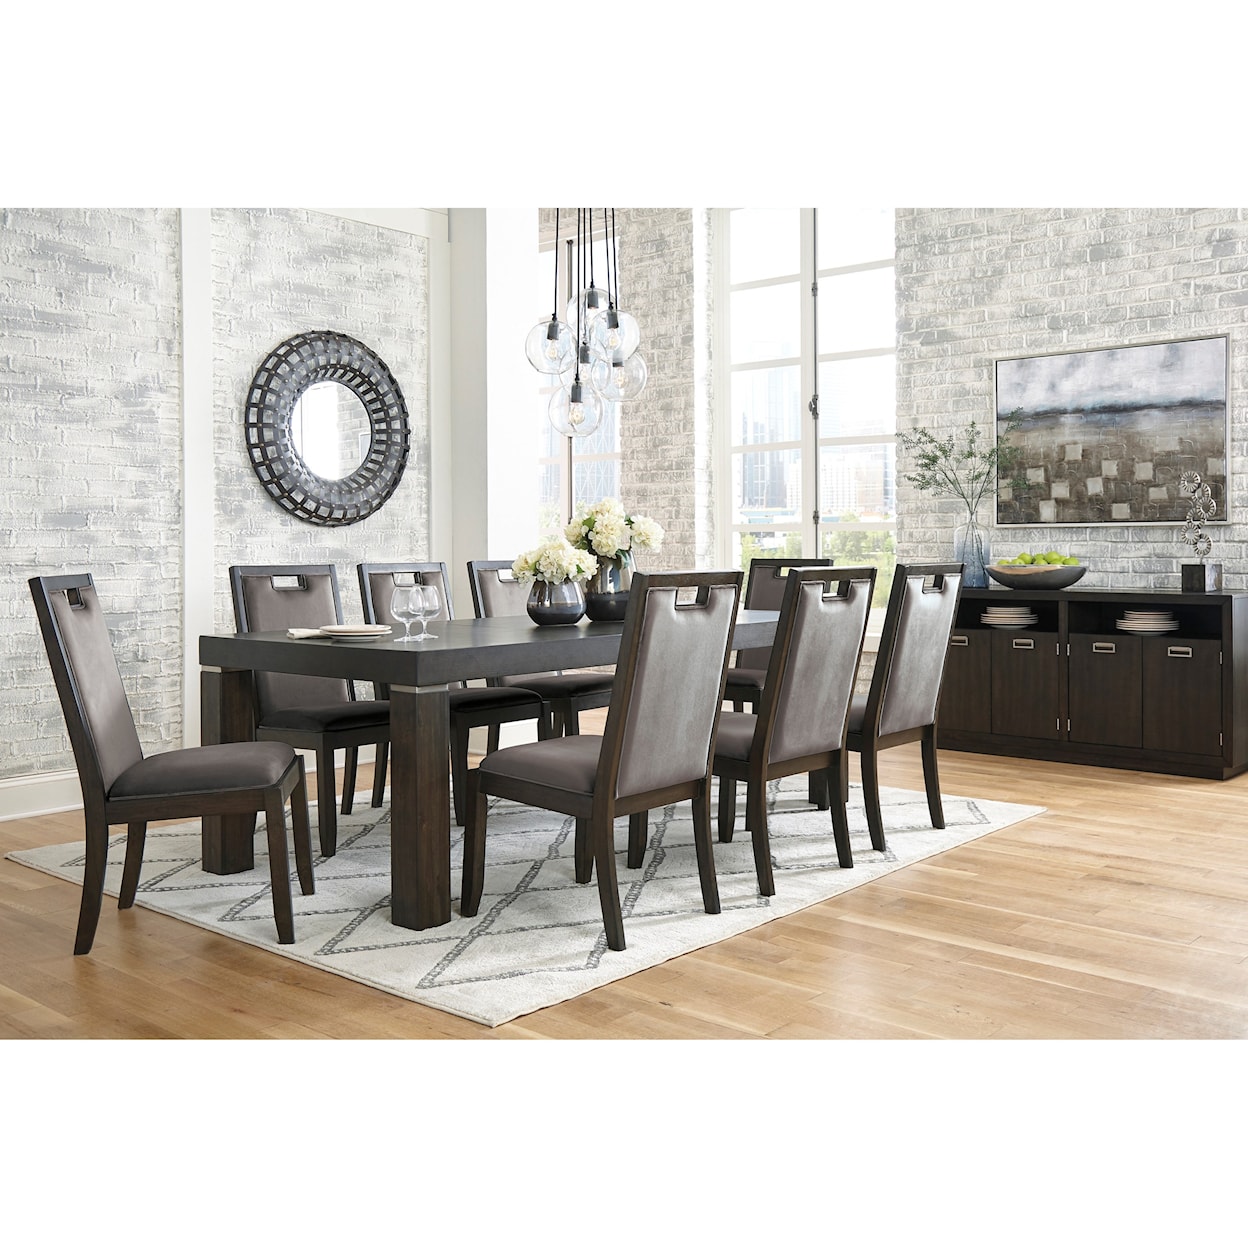 Michael Alan Select Hyndell Dining Room Group